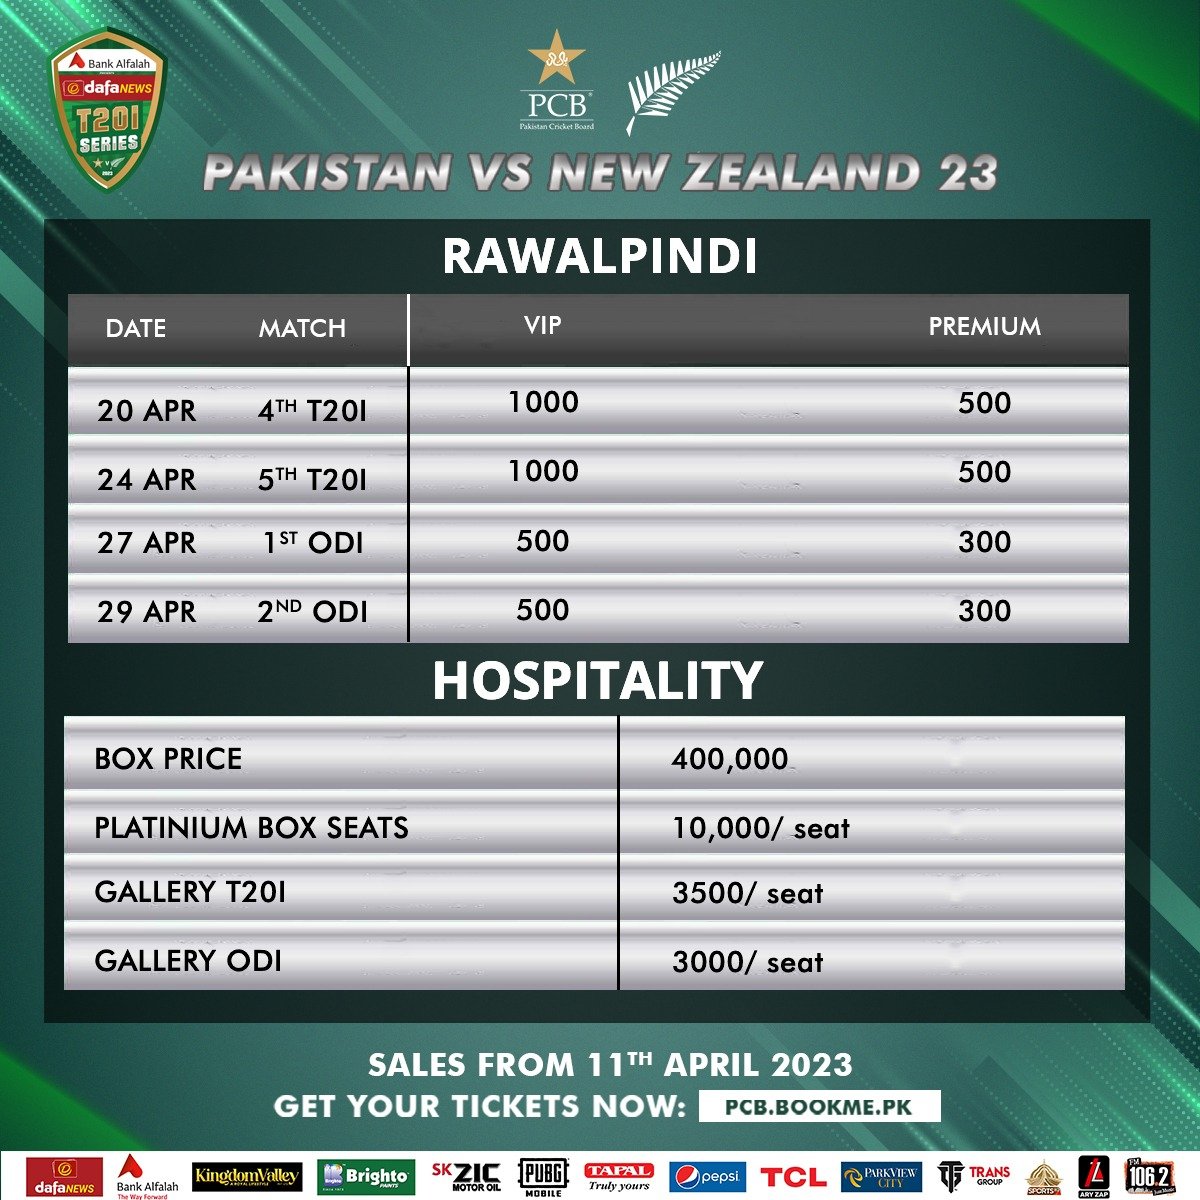 Tickets for Pak v NZ matches in Rawalpindi and Karachi to go on sale